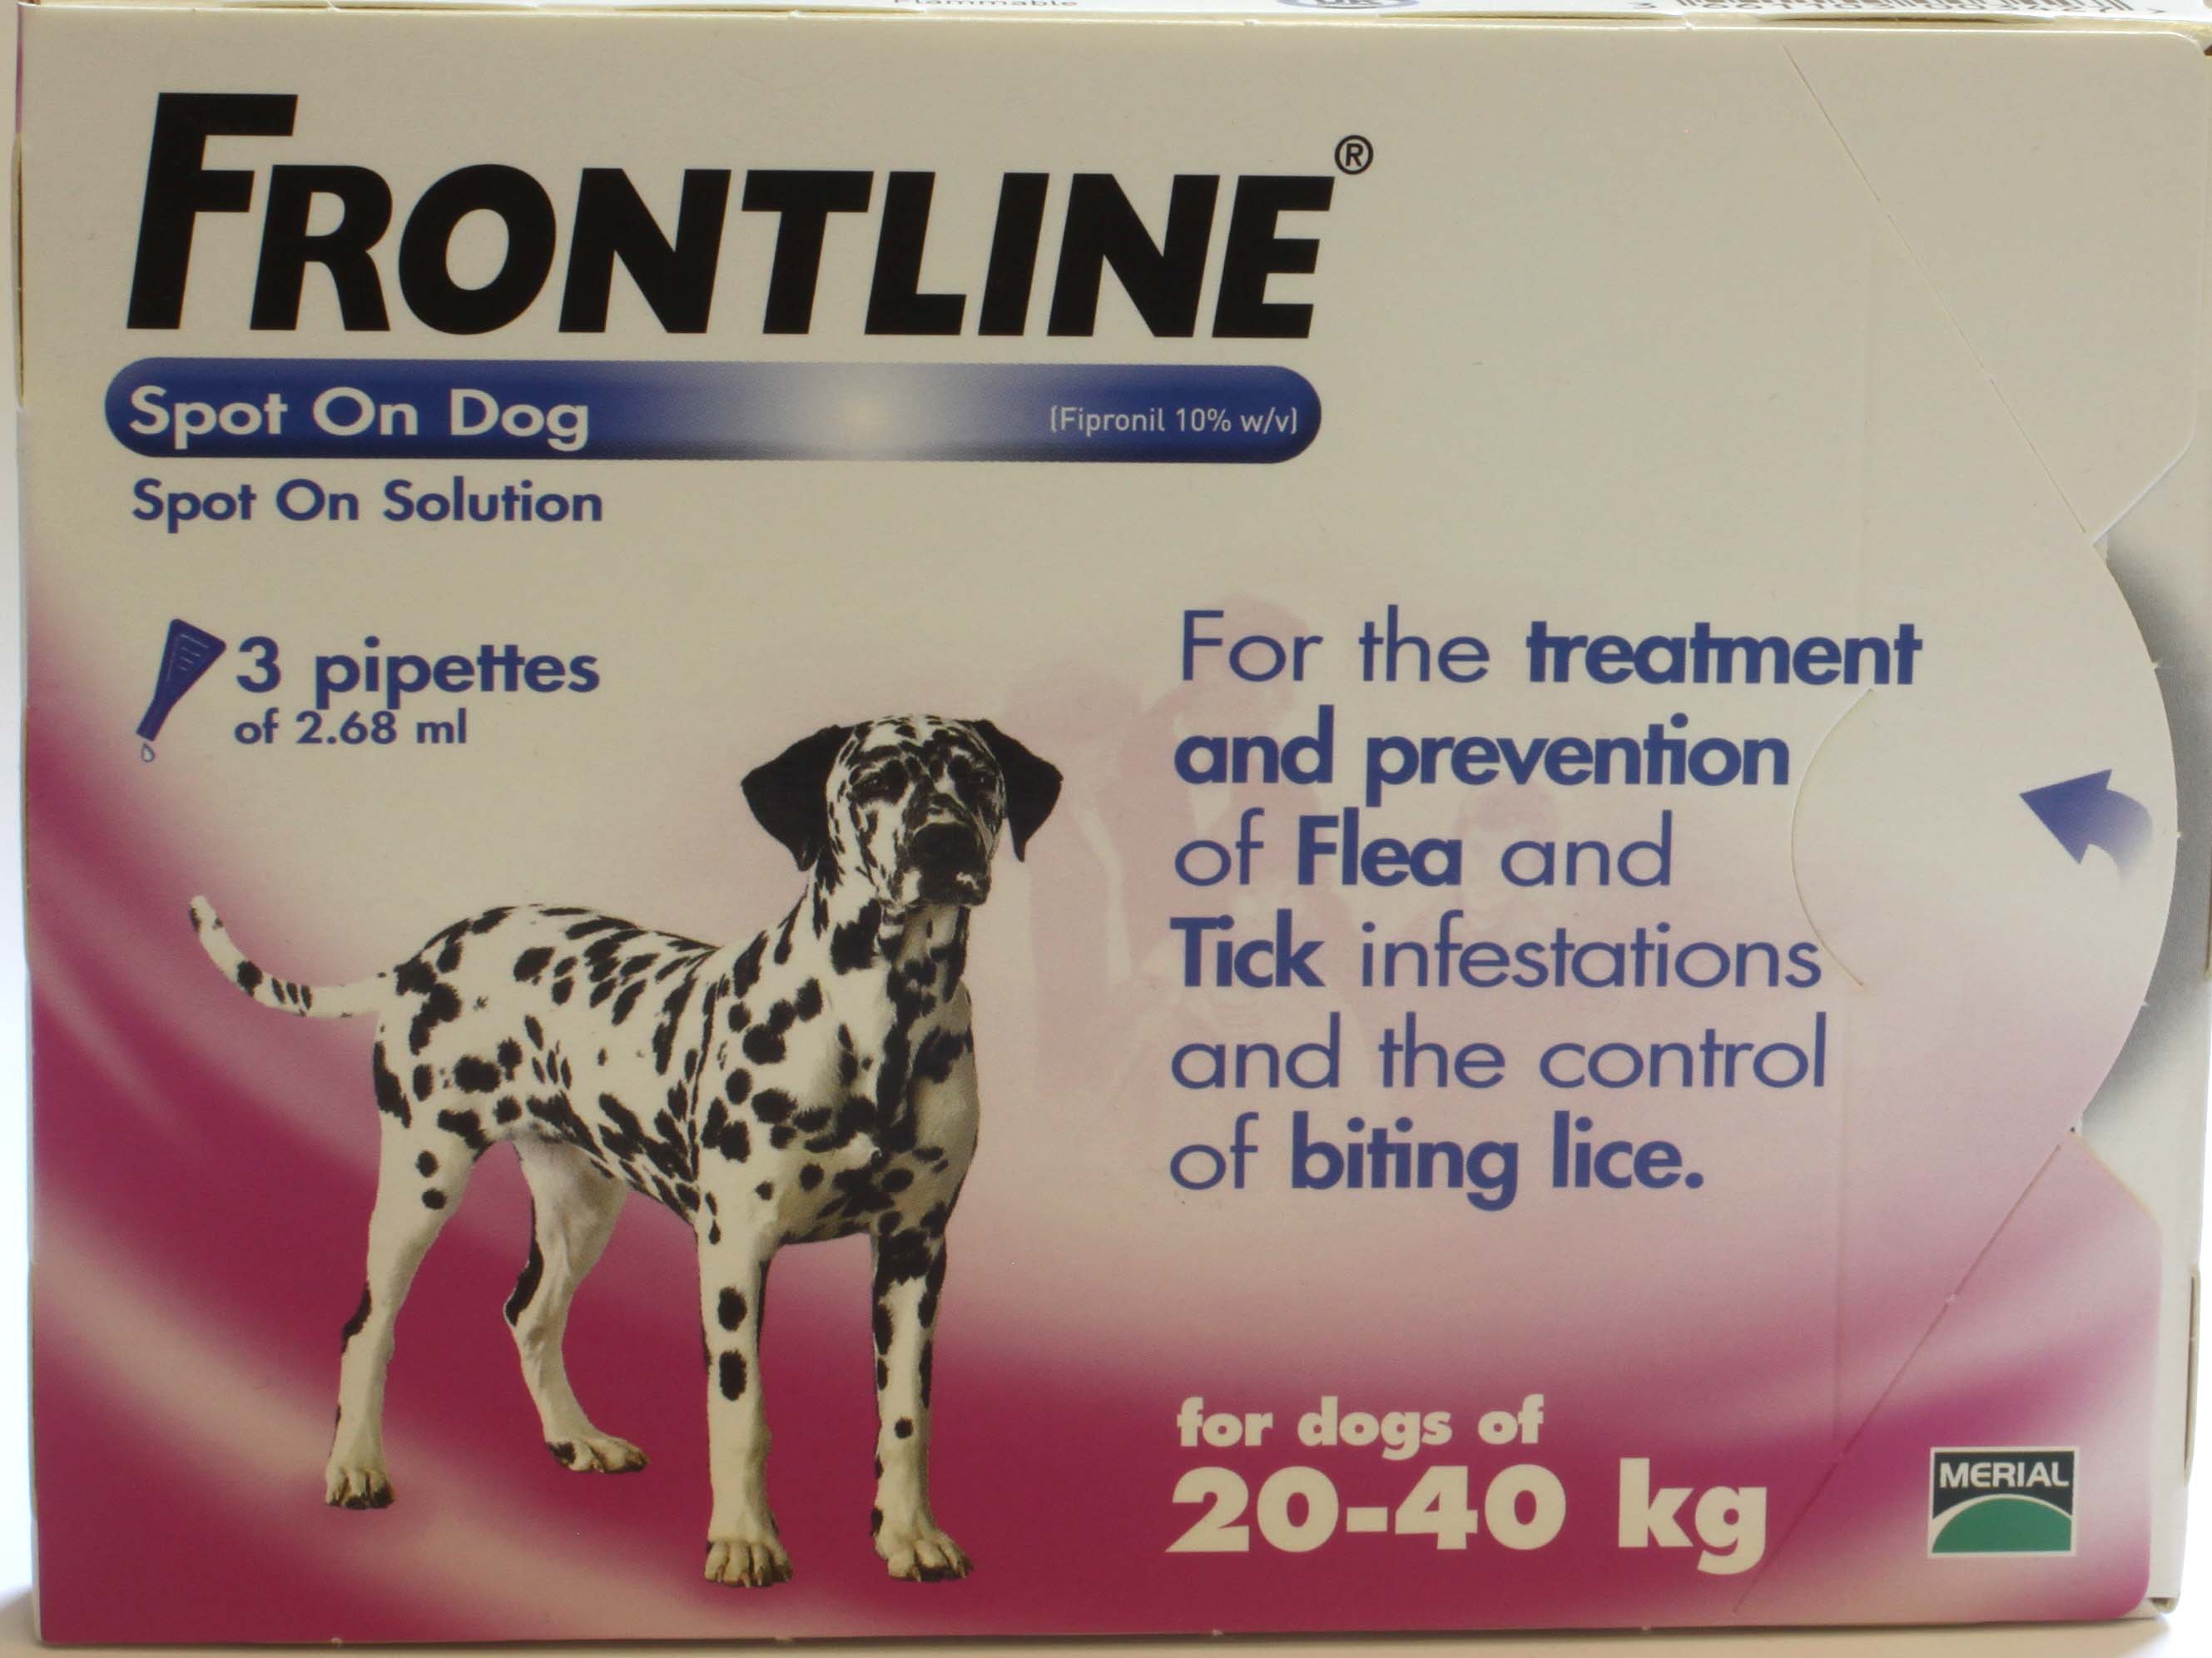 Frontline Spot On Dog Large Dog- 3 Pipettes of 2.68ml